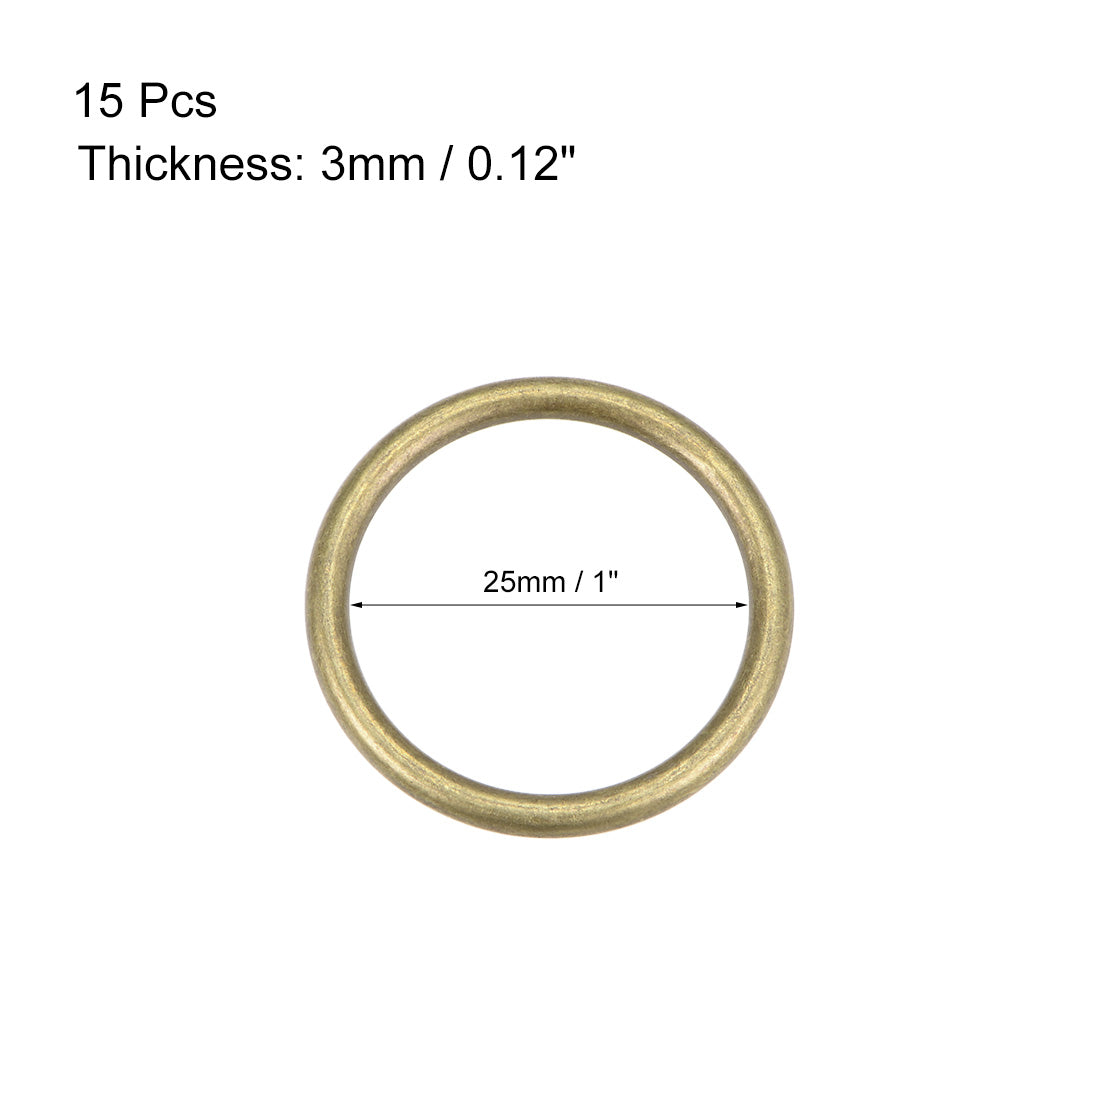 uxcell Uxcell O Ring Buckle 25mm(1") ID 3mm Thickness Zinc Alloy O-Rings for Hardware Bags Belts Craft DIY Accessories, Bronze Tone 15pcs